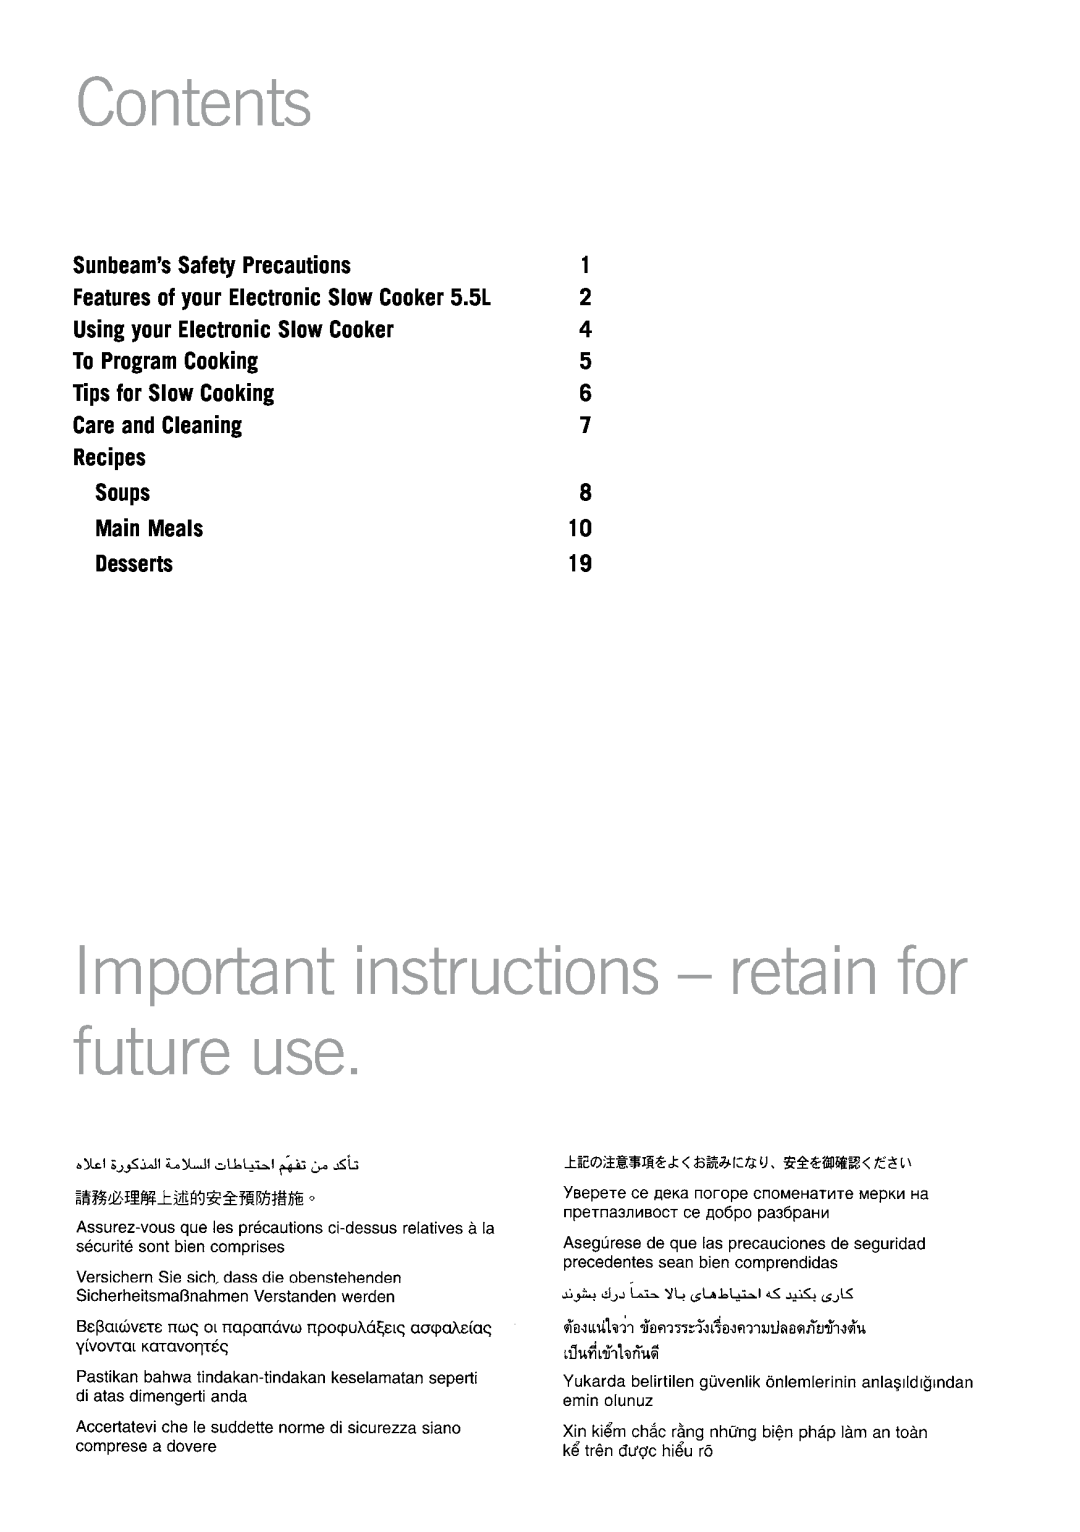 Sunbeam HP5590 Contents, Important instructions - retain for future use, Sunbeam’s Safety Precautions, To Program Cooking 